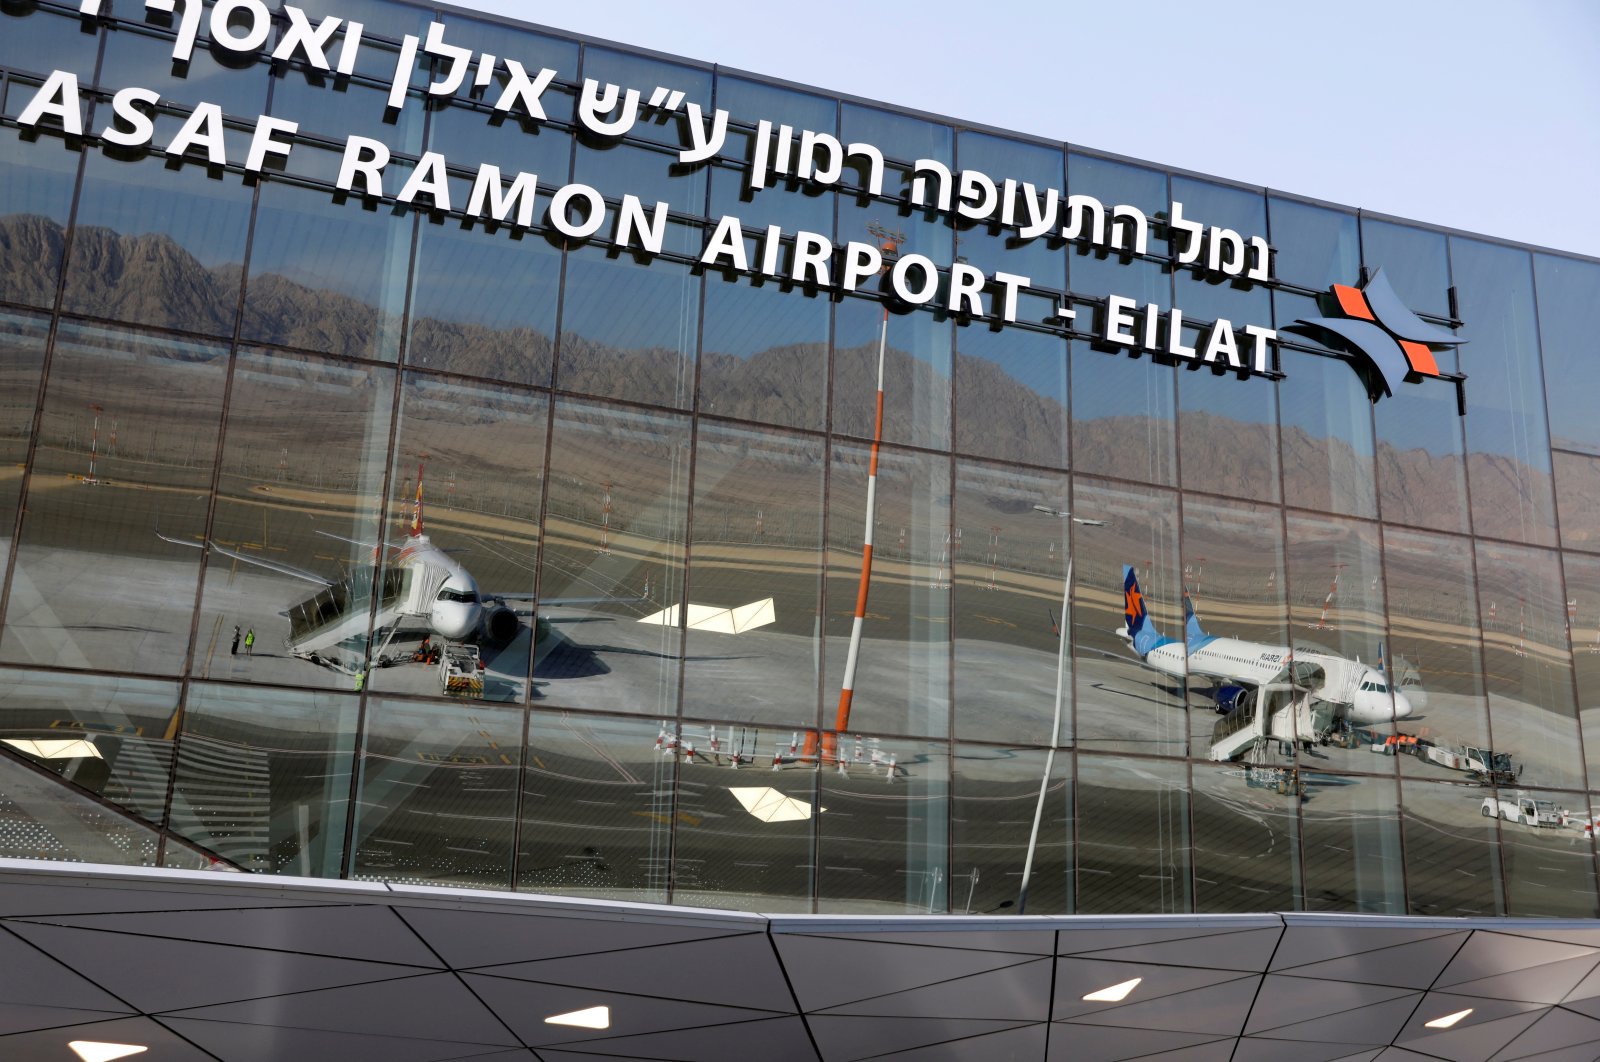 Palestinians in West Bank to fly to Türkiye from Ramon Airport